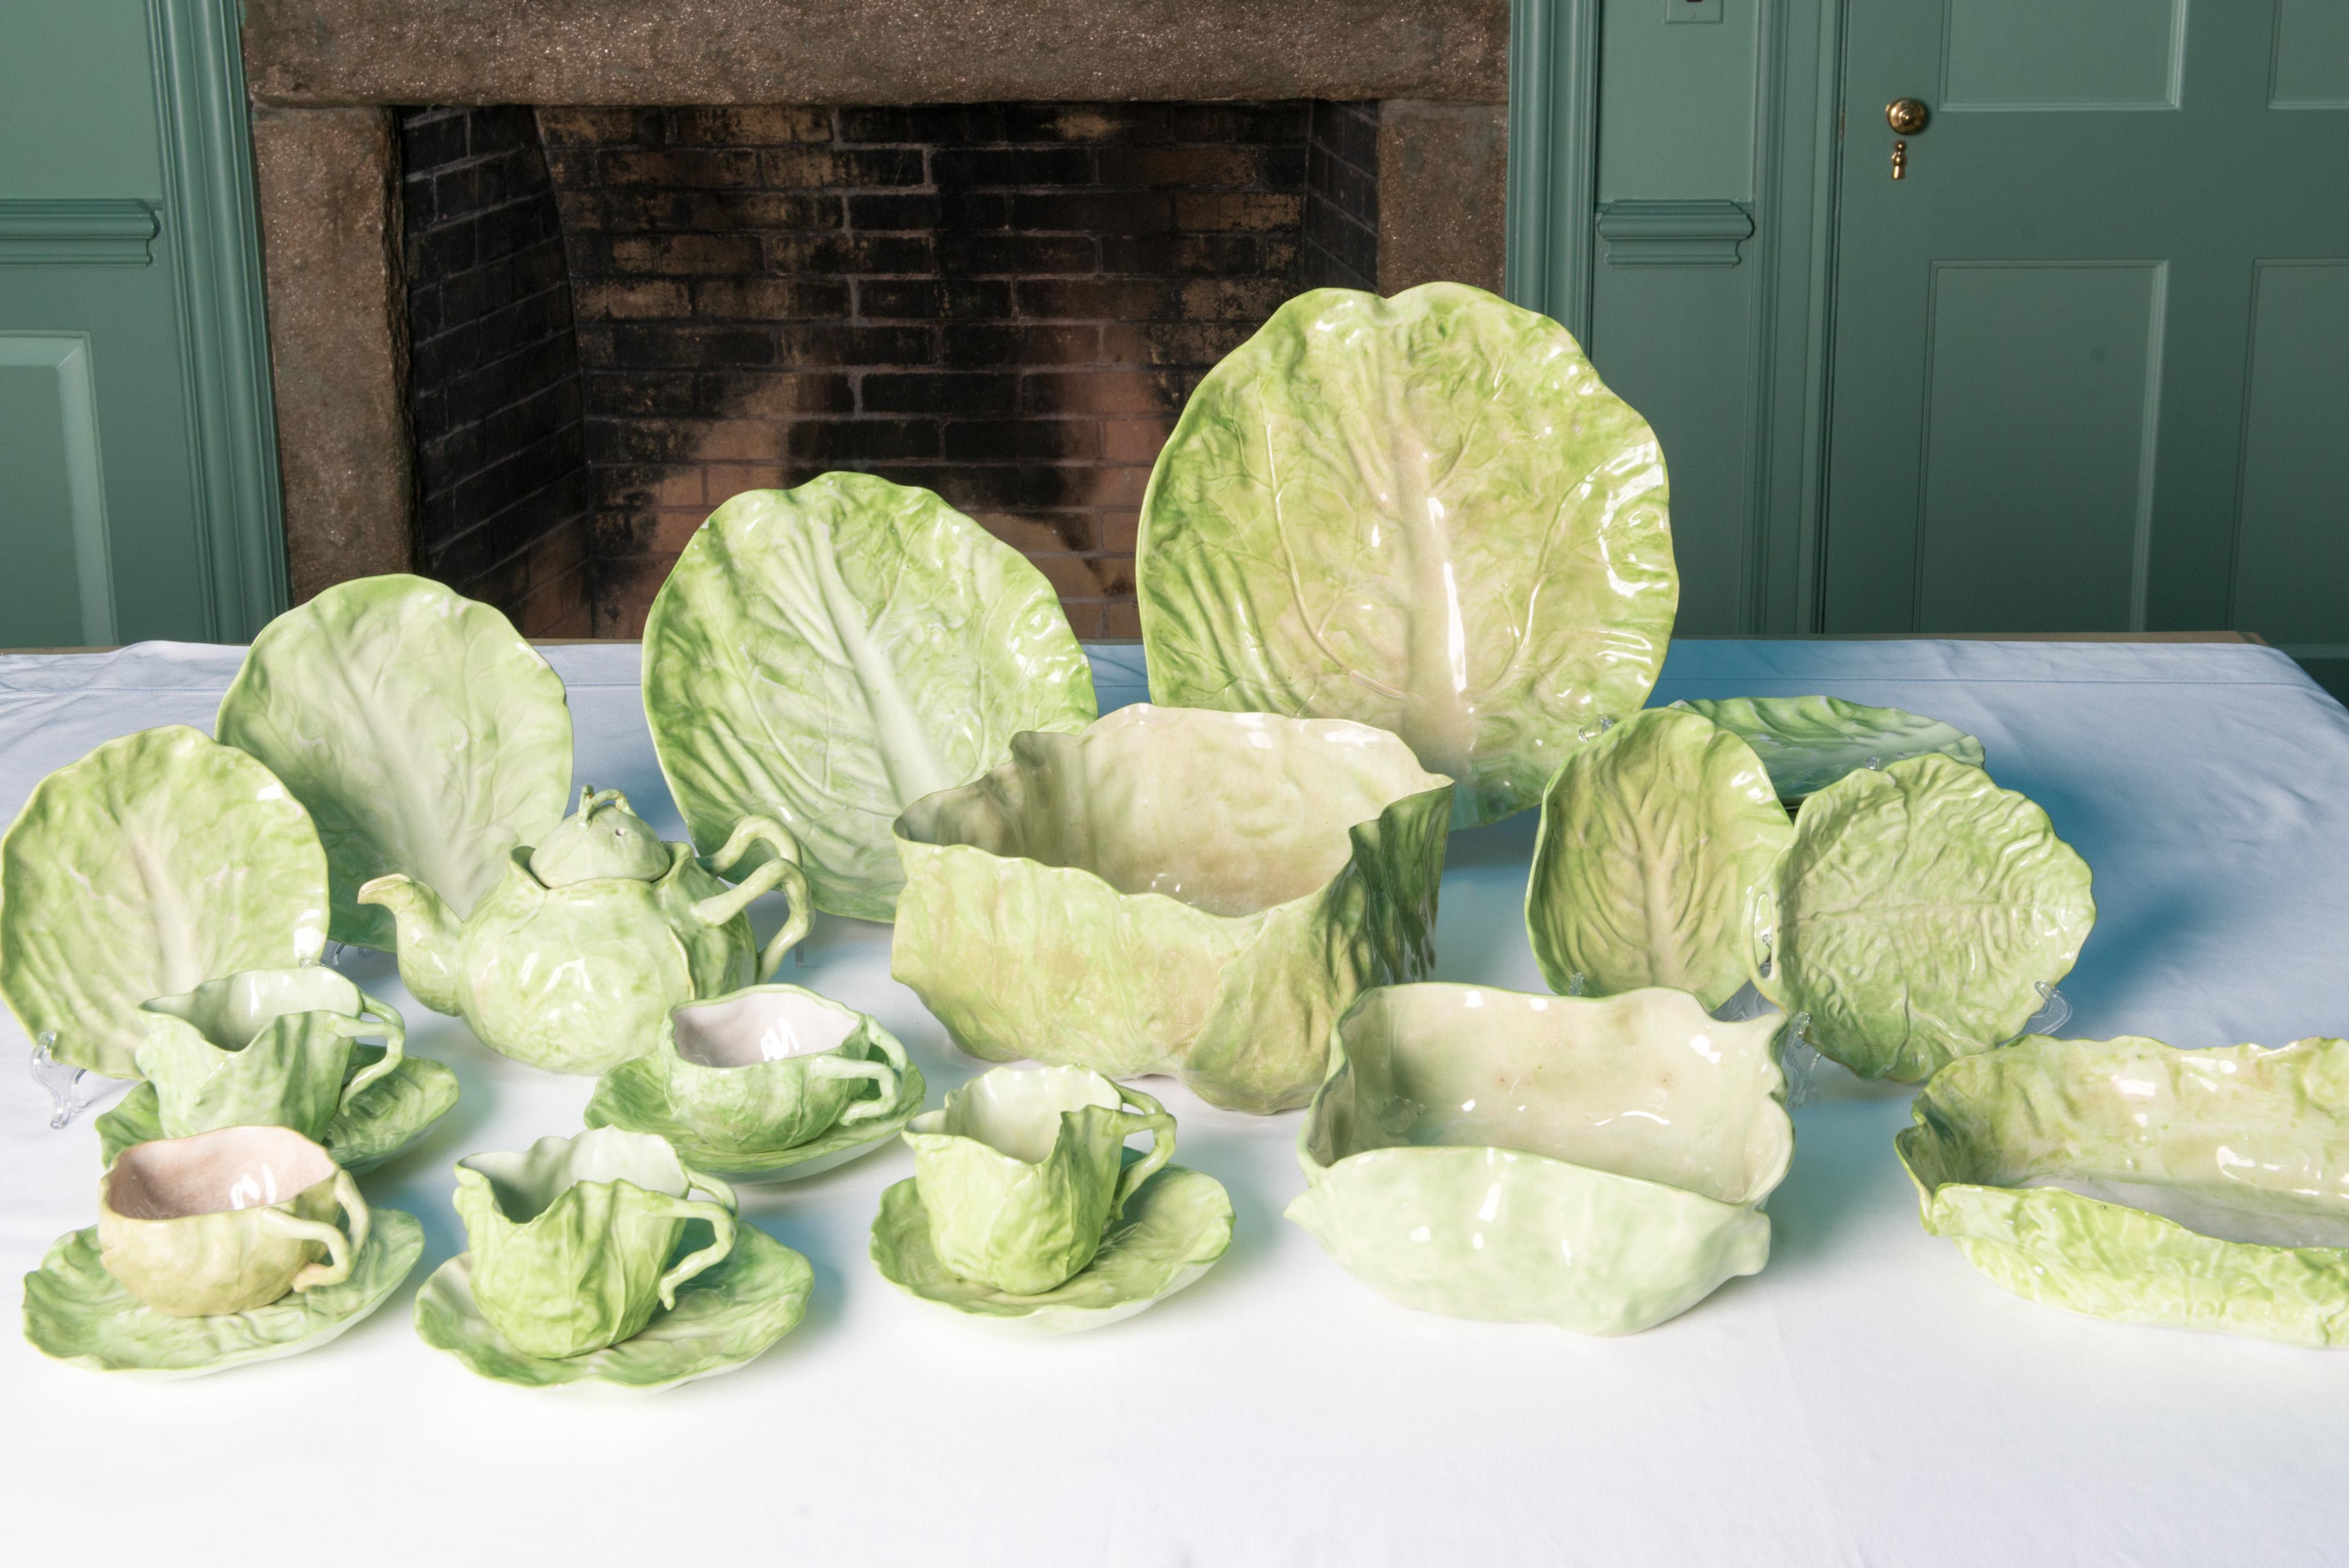 This is a large collection New Milford Wannopee green Lettuce Leaf pottery. These are rare and hard to find pieces. They are considered part of the Majolica family. Due to the age and the nature of the pottery, the green finish is often irregular